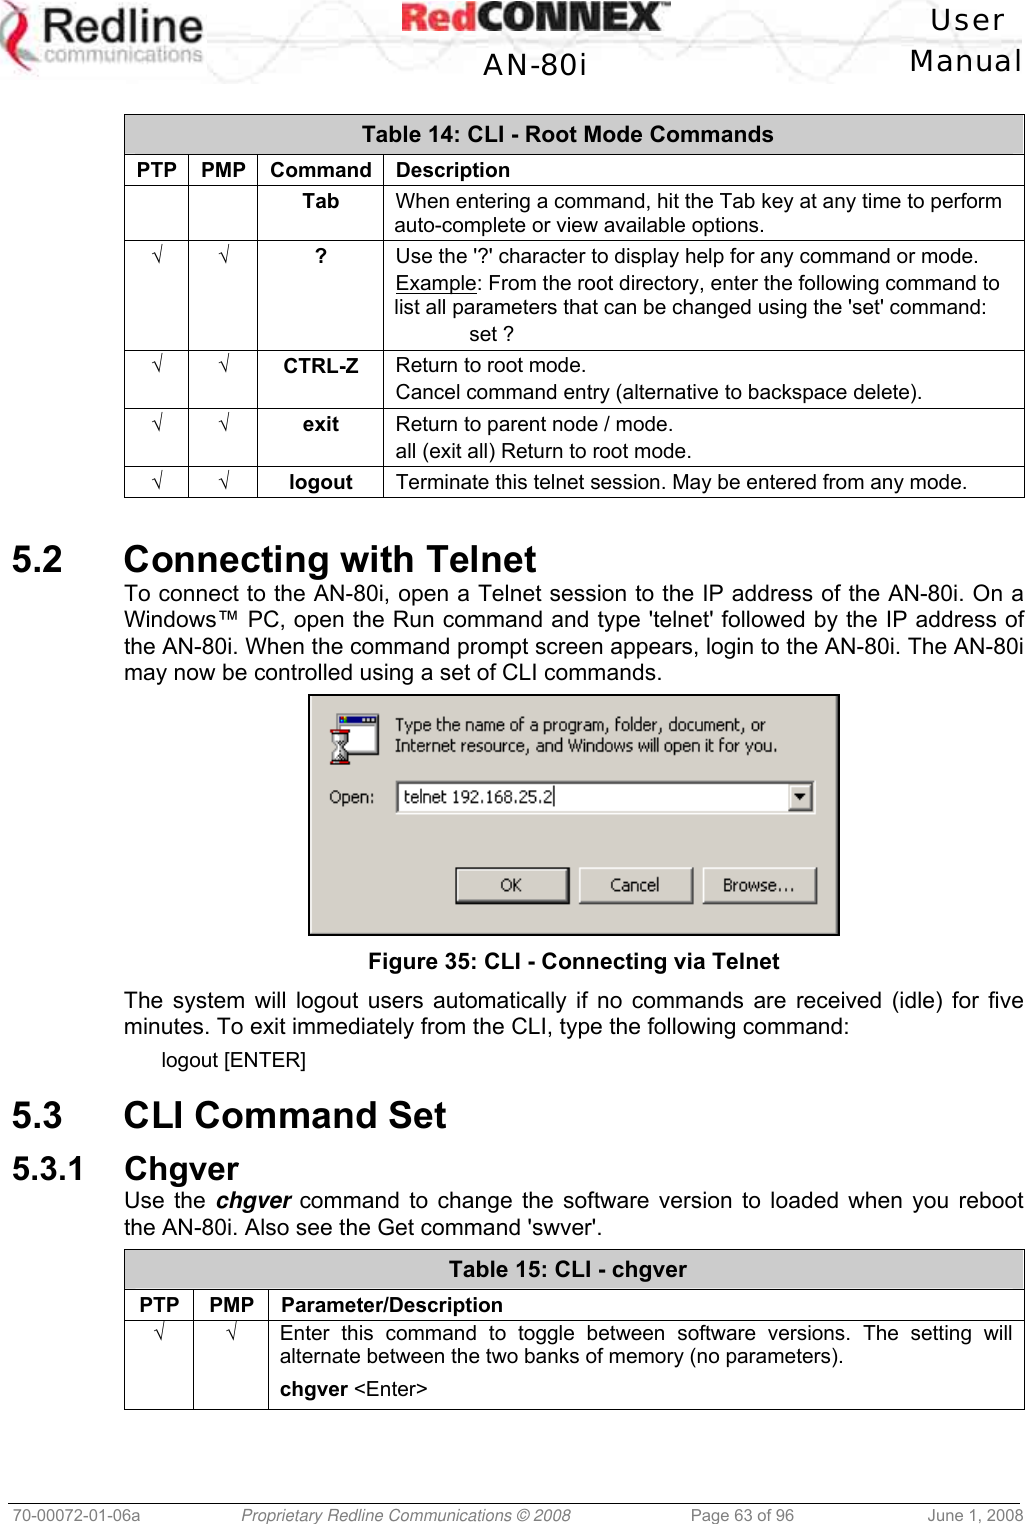   User  AN-80i Manual  70-00072-01-06a  Proprietary Redline Communications © 2008  Page 63 of 96  June 1, 2008  Table 14: CLI - Root Mode Commands PTP PMP Command Description    Tab  When entering a command, hit the Tab key at any time to perform auto-complete or view available options. √ √ ?  Use the &apos;?&apos; character to display help for any command or mode. Example: From the root directory, enter the following command to list all parameters that can be changed using the &apos;set&apos; command:  set ? √ √ CTRL-Z  Return to root mode. Cancel command entry (alternative to backspace delete). √ √ exit  Return to parent node / mode. all (exit all) Return to root mode. √ √ logout  Terminate this telnet session. May be entered from any mode.  5.2  Connecting with Telnet To connect to the AN-80i, open a Telnet session to the IP address of the AN-80i. On a Windows™ PC, open the Run command and type &apos;telnet&apos; followed by the IP address of the AN-80i. When the command prompt screen appears, login to the AN-80i. The AN-80i may now be controlled using a set of CLI commands.  Figure 35: CLI - Connecting via Telnet The system will logout users automatically if no commands are received (idle) for five minutes. To exit immediately from the CLI, type the following command: logout [ENTER]  5.3  CLI Command Set 5.3.1 Chgver Use the chgver command to change the software version to loaded when you reboot the AN-80i. Also see the Get command &apos;swver&apos;. Table 15: CLI - chgver PTP PMP Parameter/Description √ √  Enter this command to toggle between software versions. The setting will alternate between the two banks of memory (no parameters). chgver &lt;Enter&gt;  